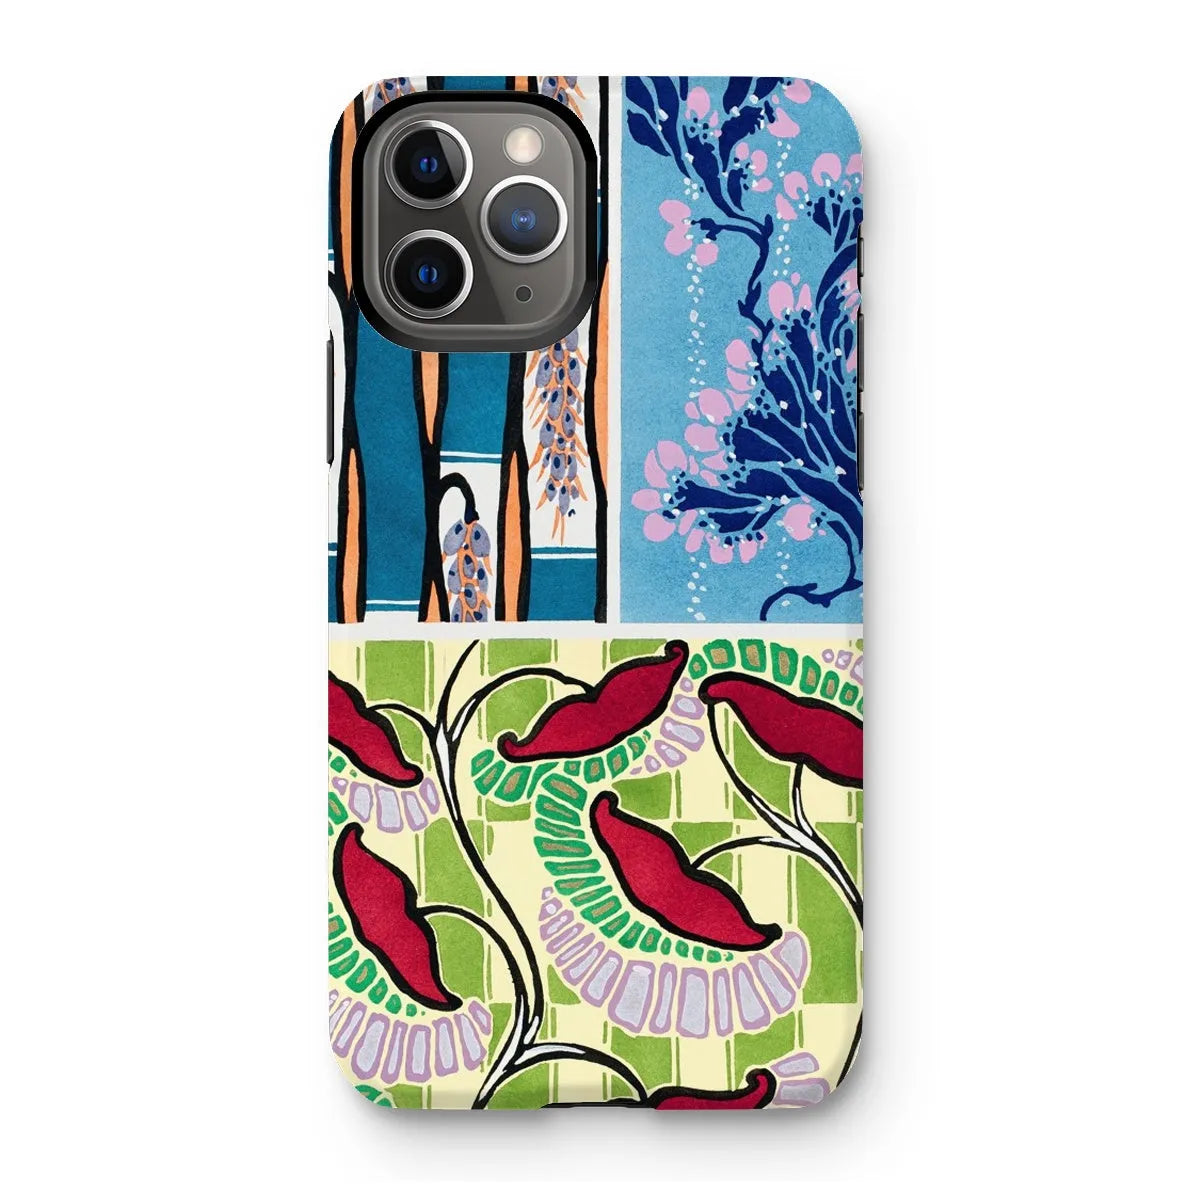 Floral Kitsch Aesthetic Art Phone Case - E.a. Séguy - Iphone 11 Pro / Matte - Mobile Phone Cases - Aesthetic Art